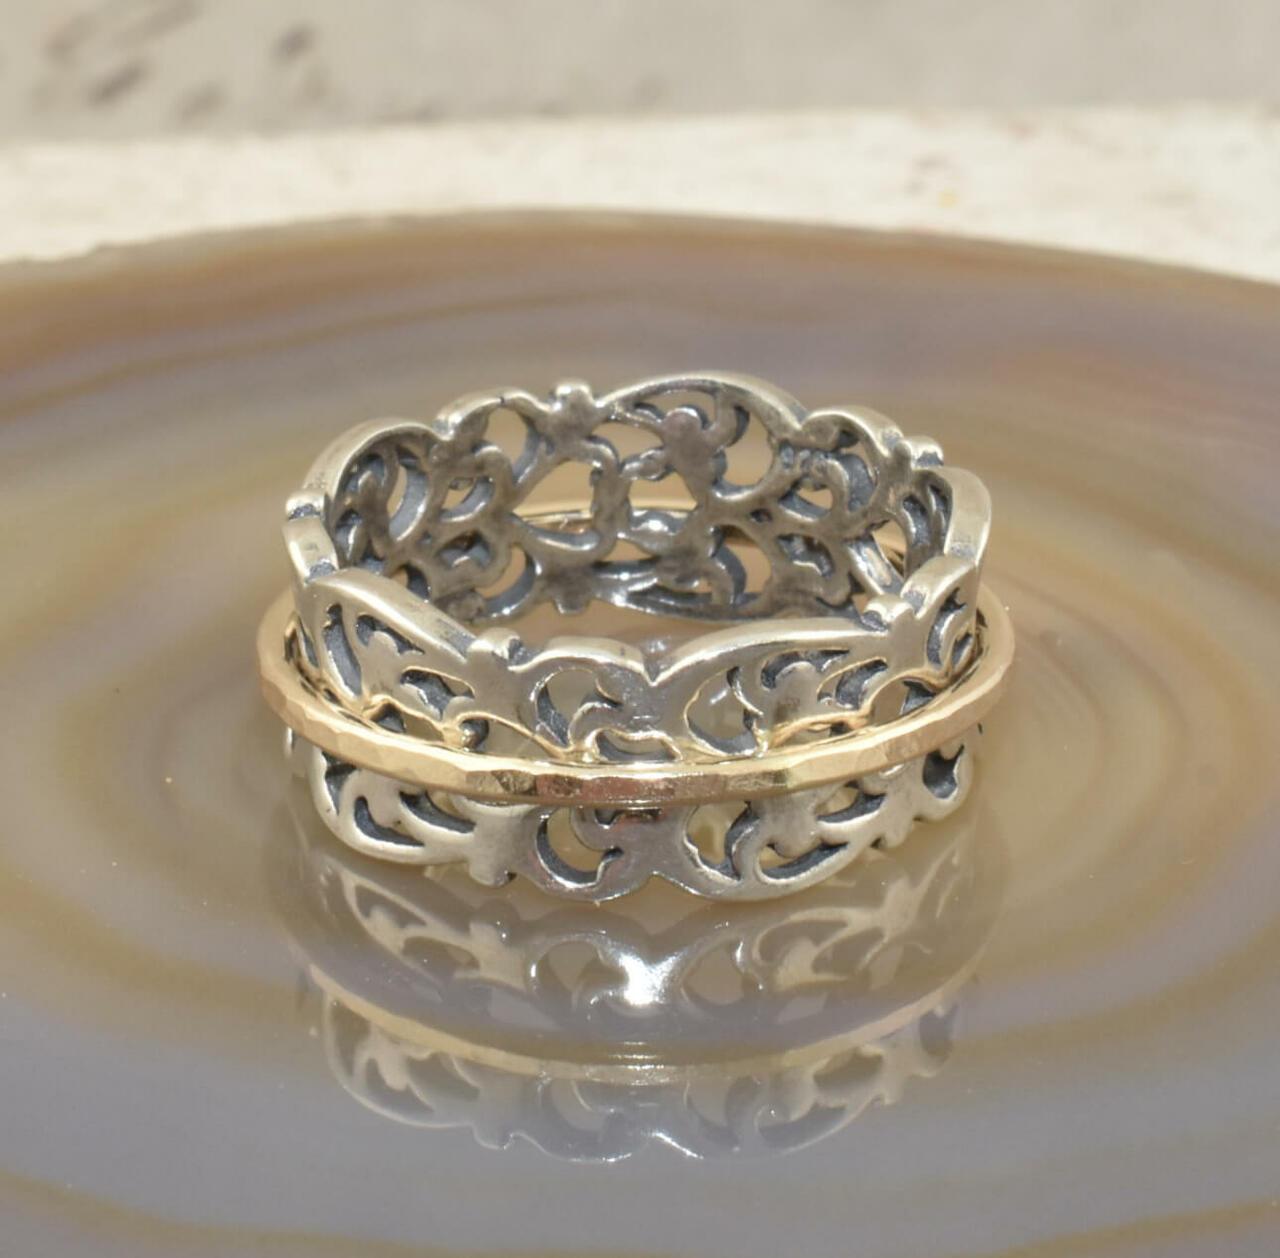 .925 sterling silver filigree ring with gold filled band